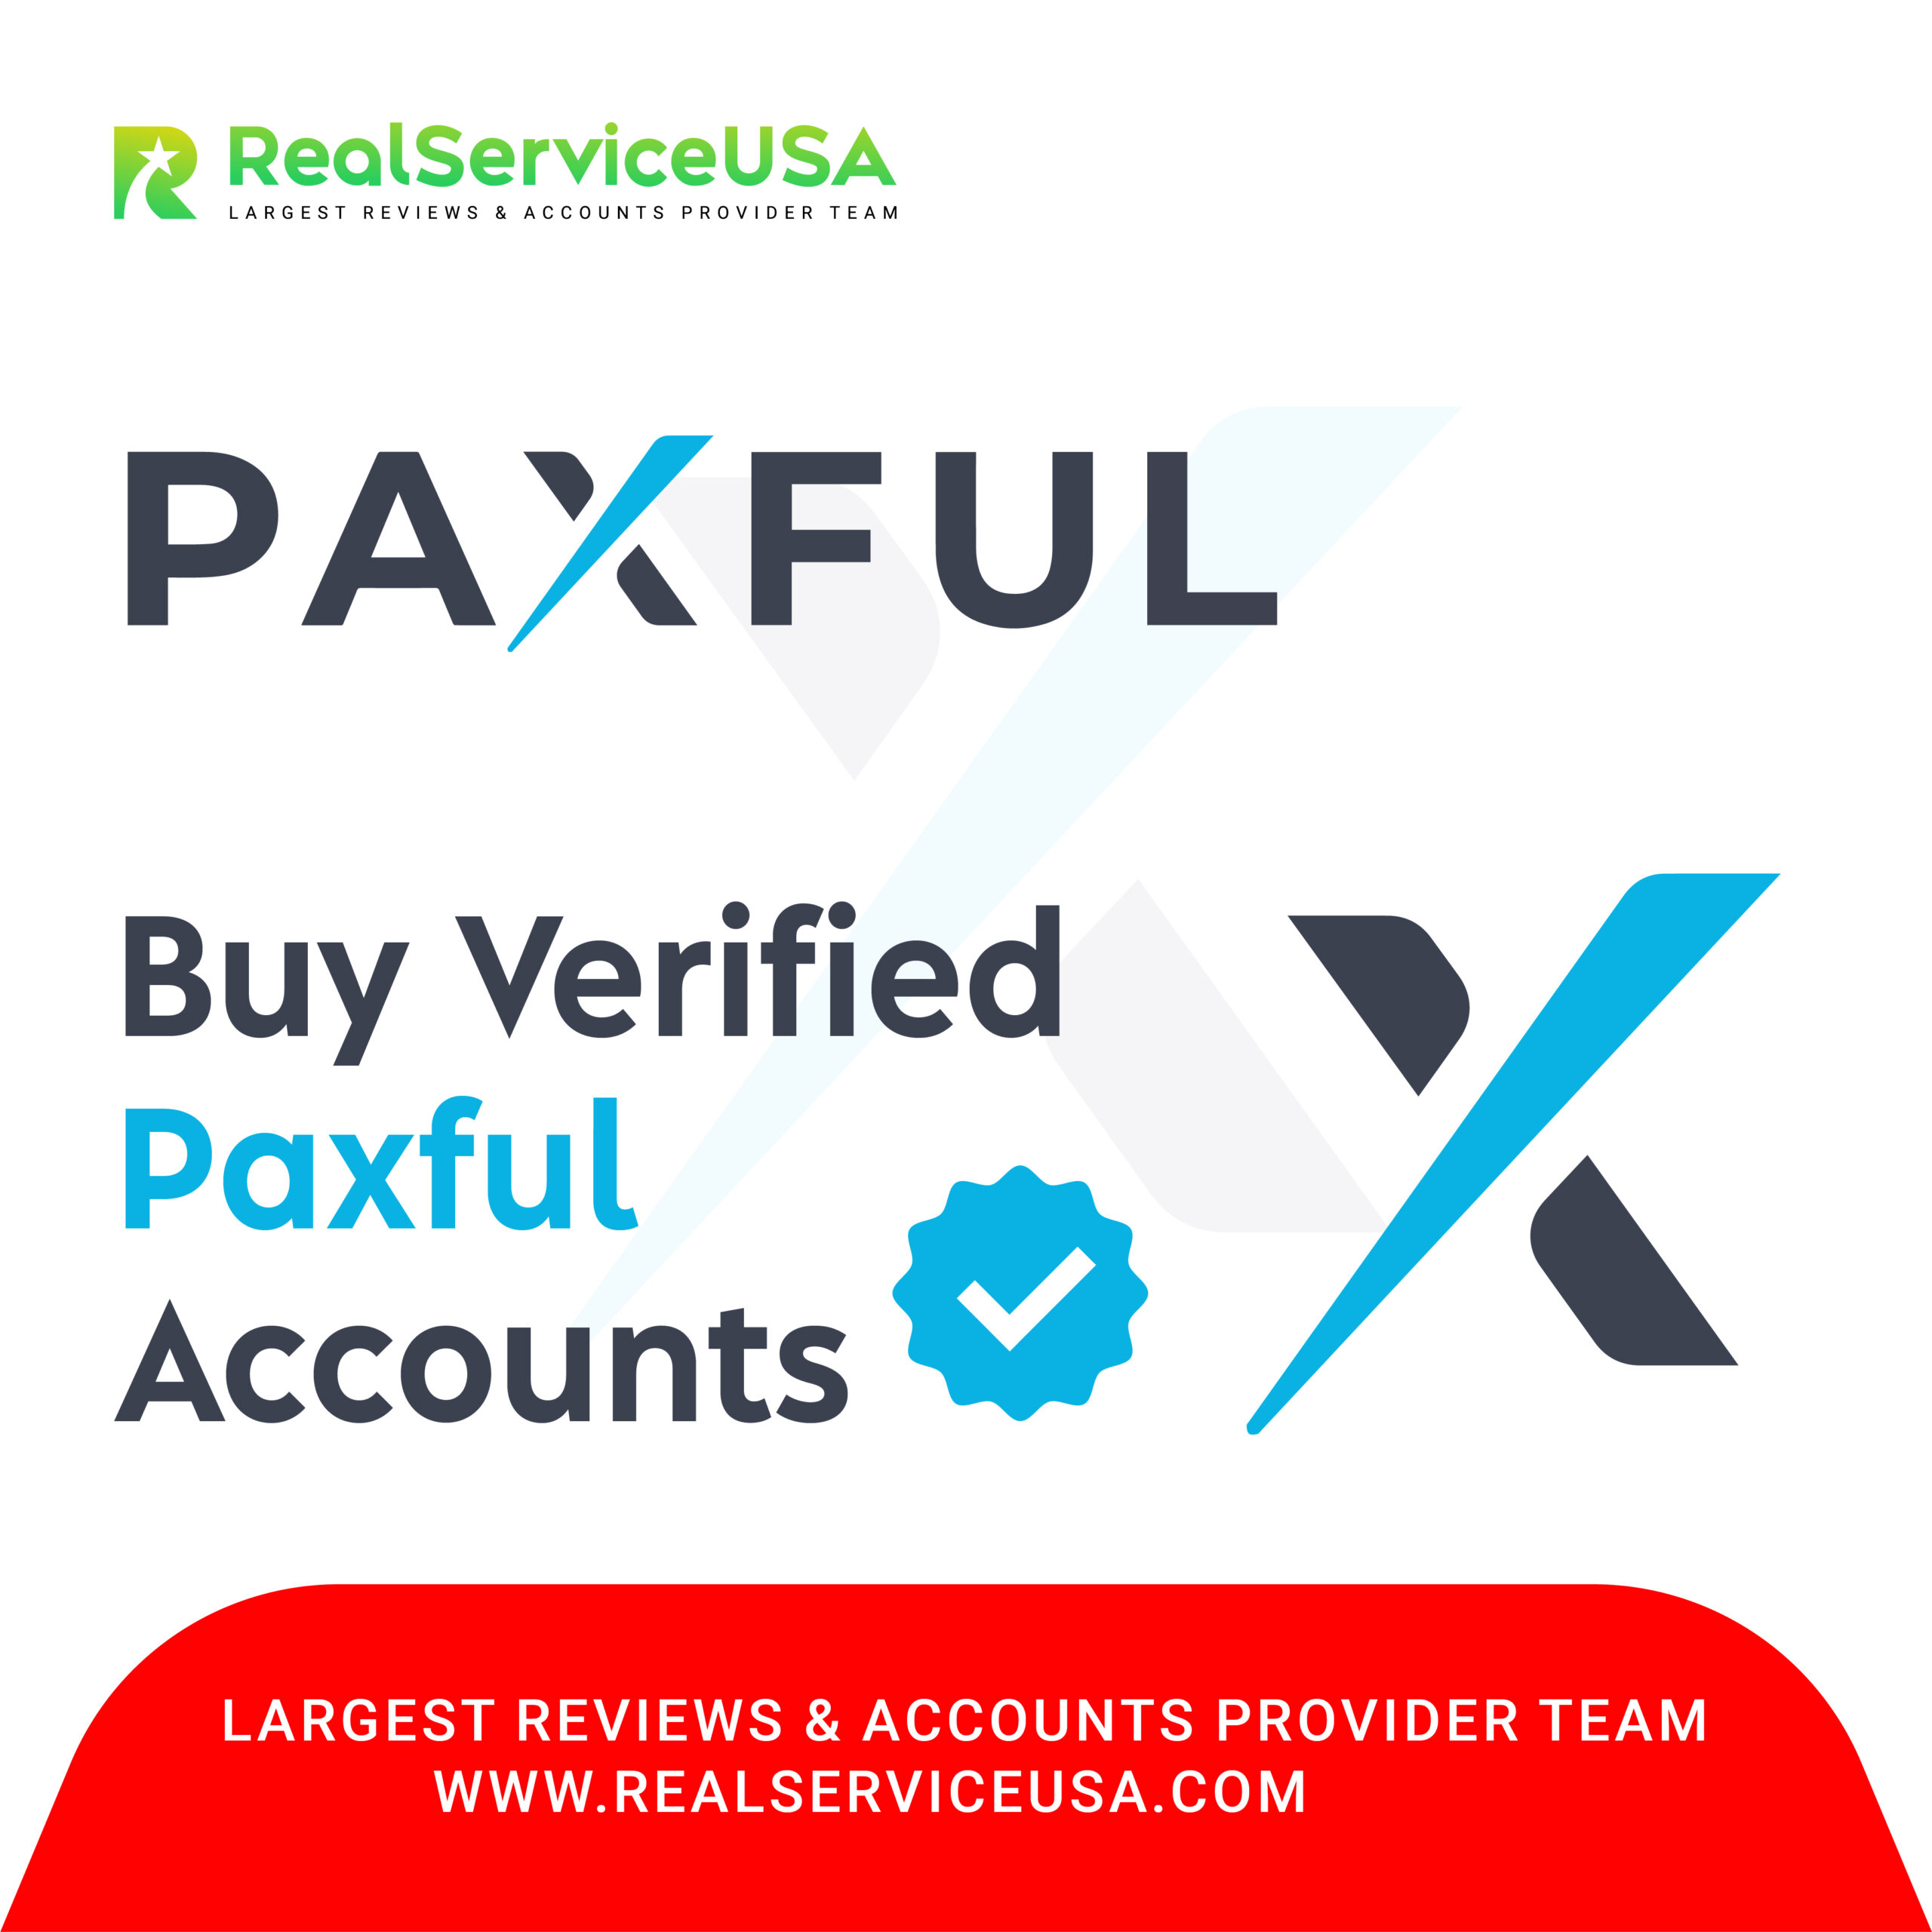 Verified Paxful Accounts